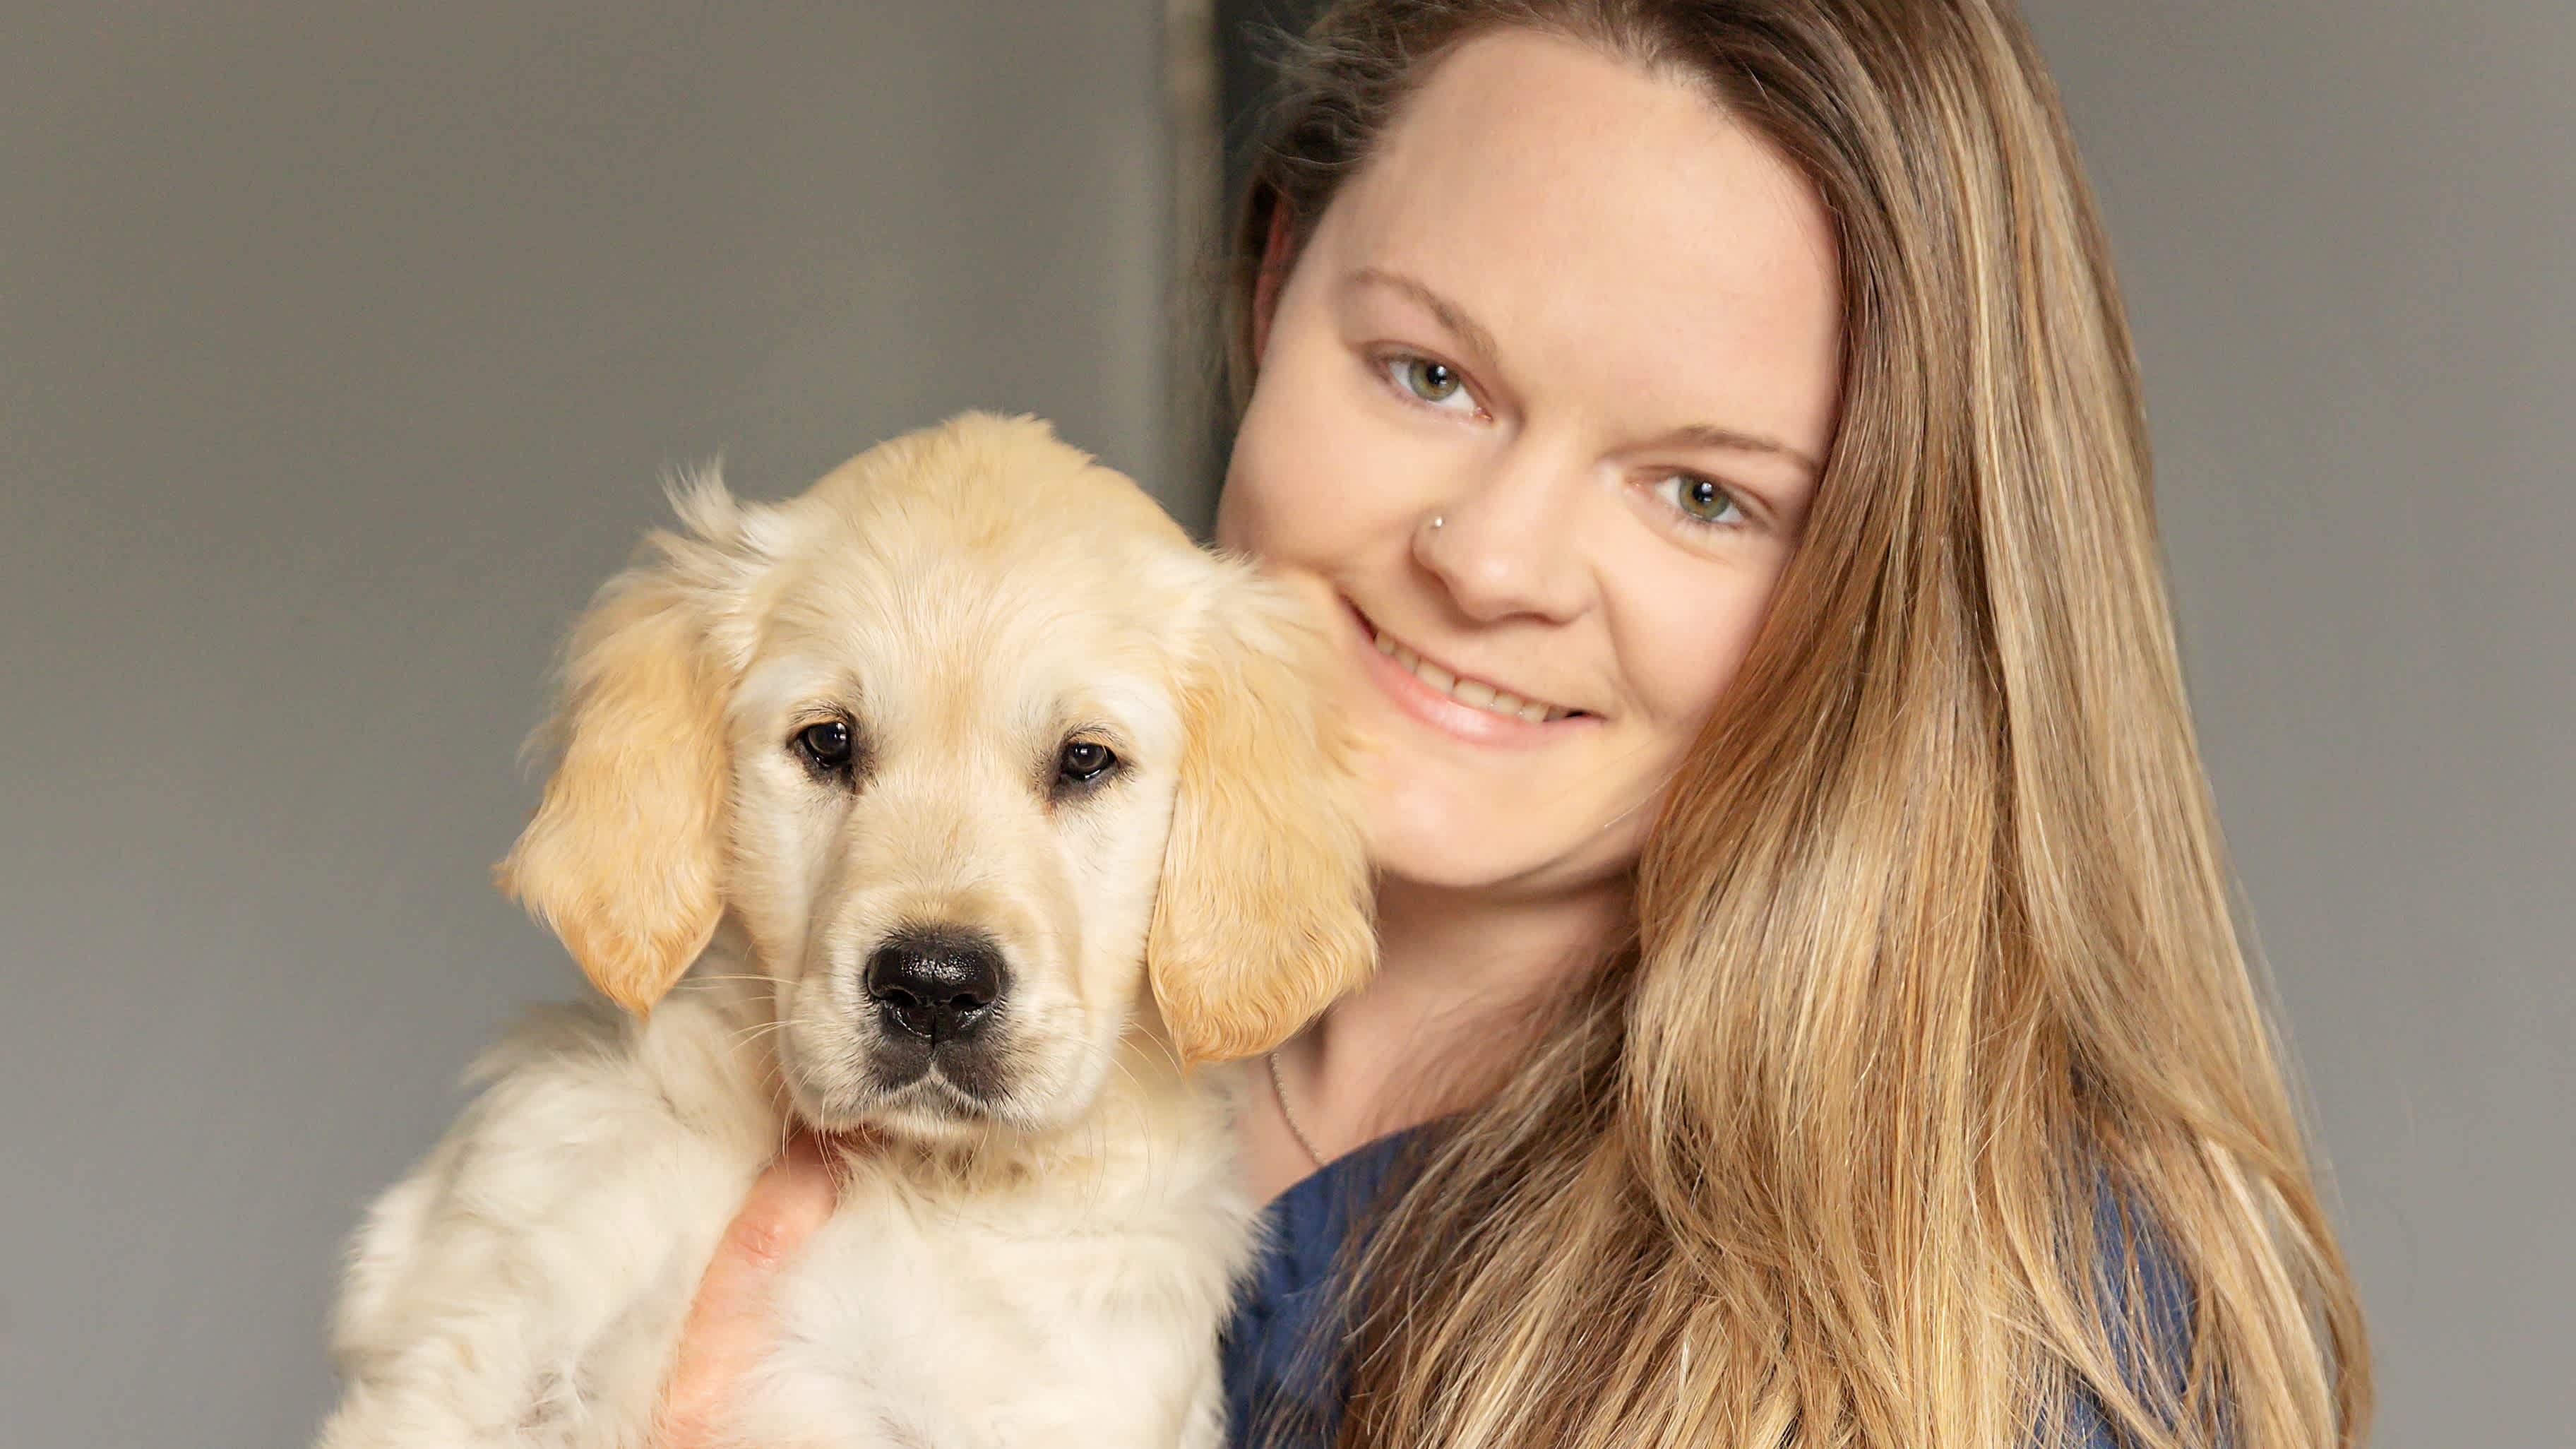 Becky Hunt holds a golden retriever puppy in her arms - they are both looking at the camera